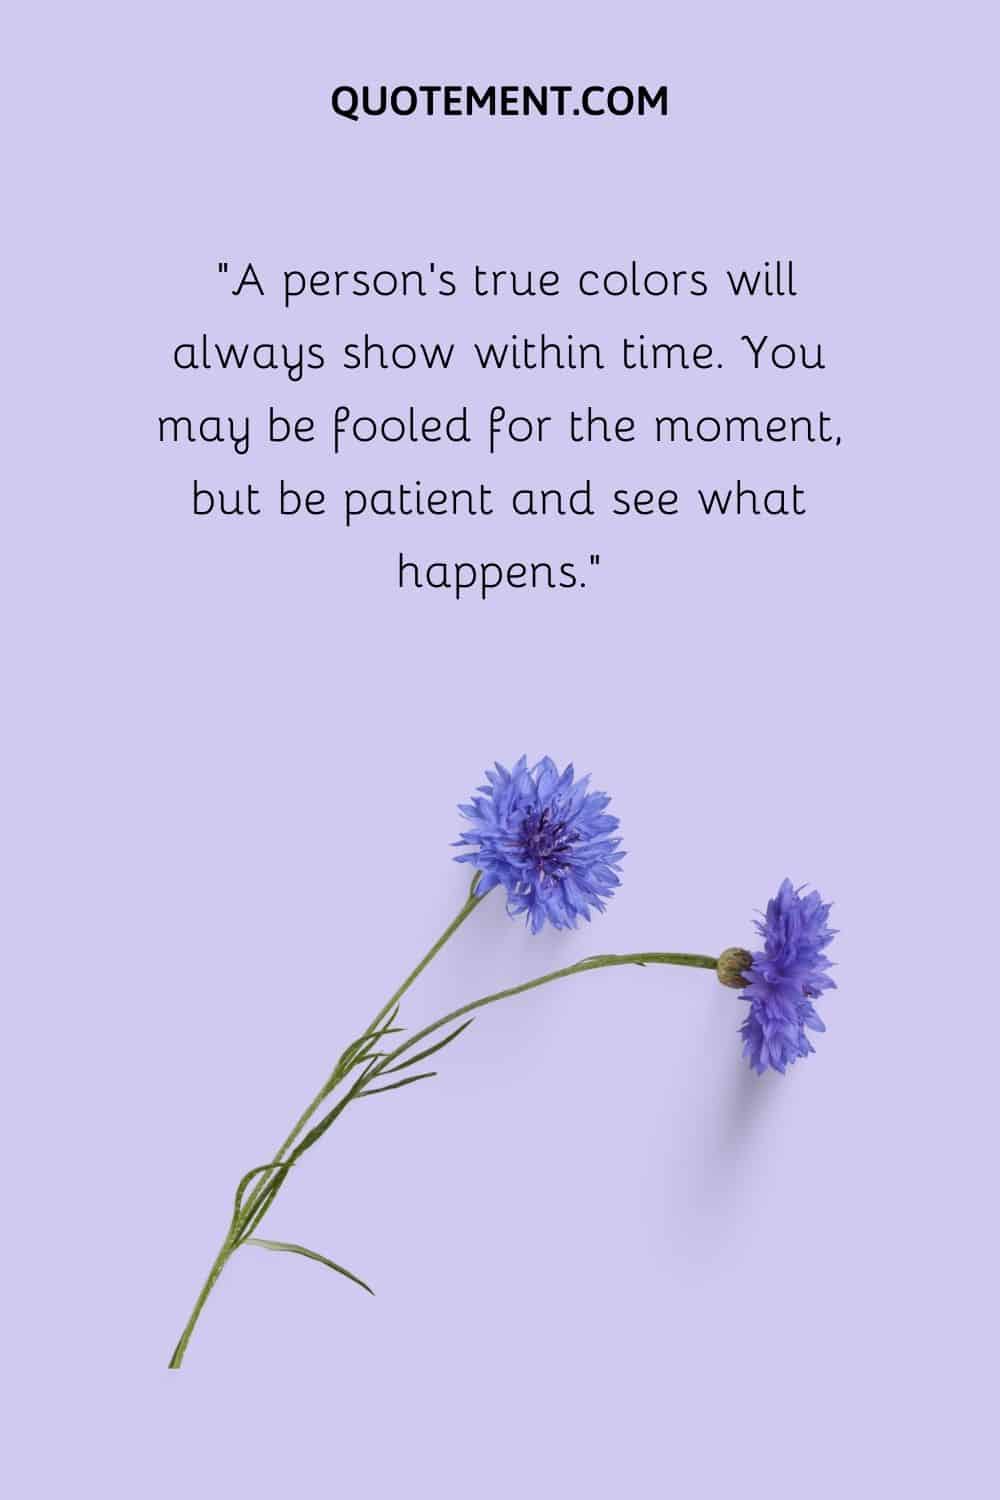 You may be fooled for the moment, but be patient and see what happens